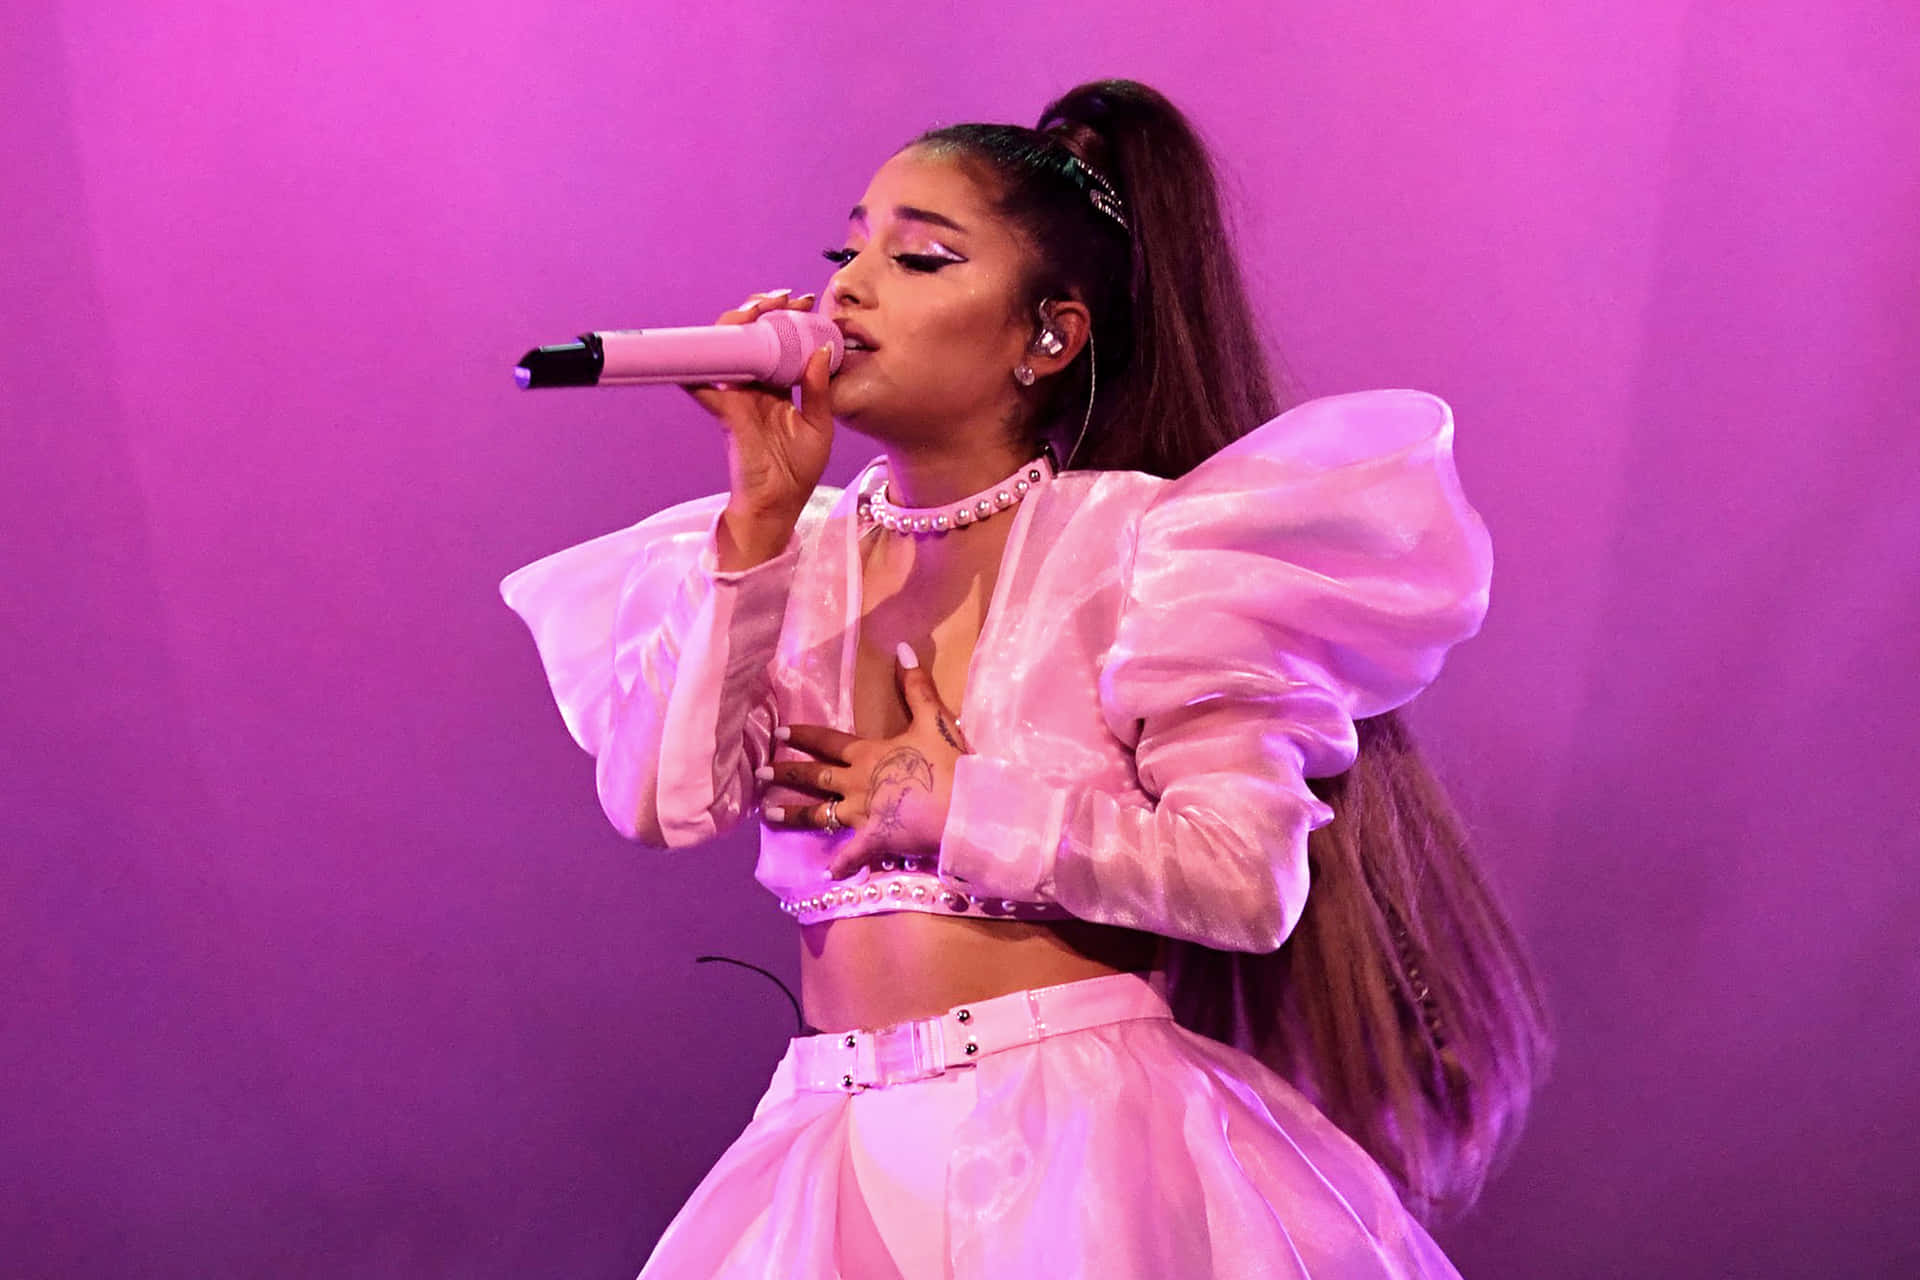 Pop Star Ariana Grande Performs to Her Adoring Fans